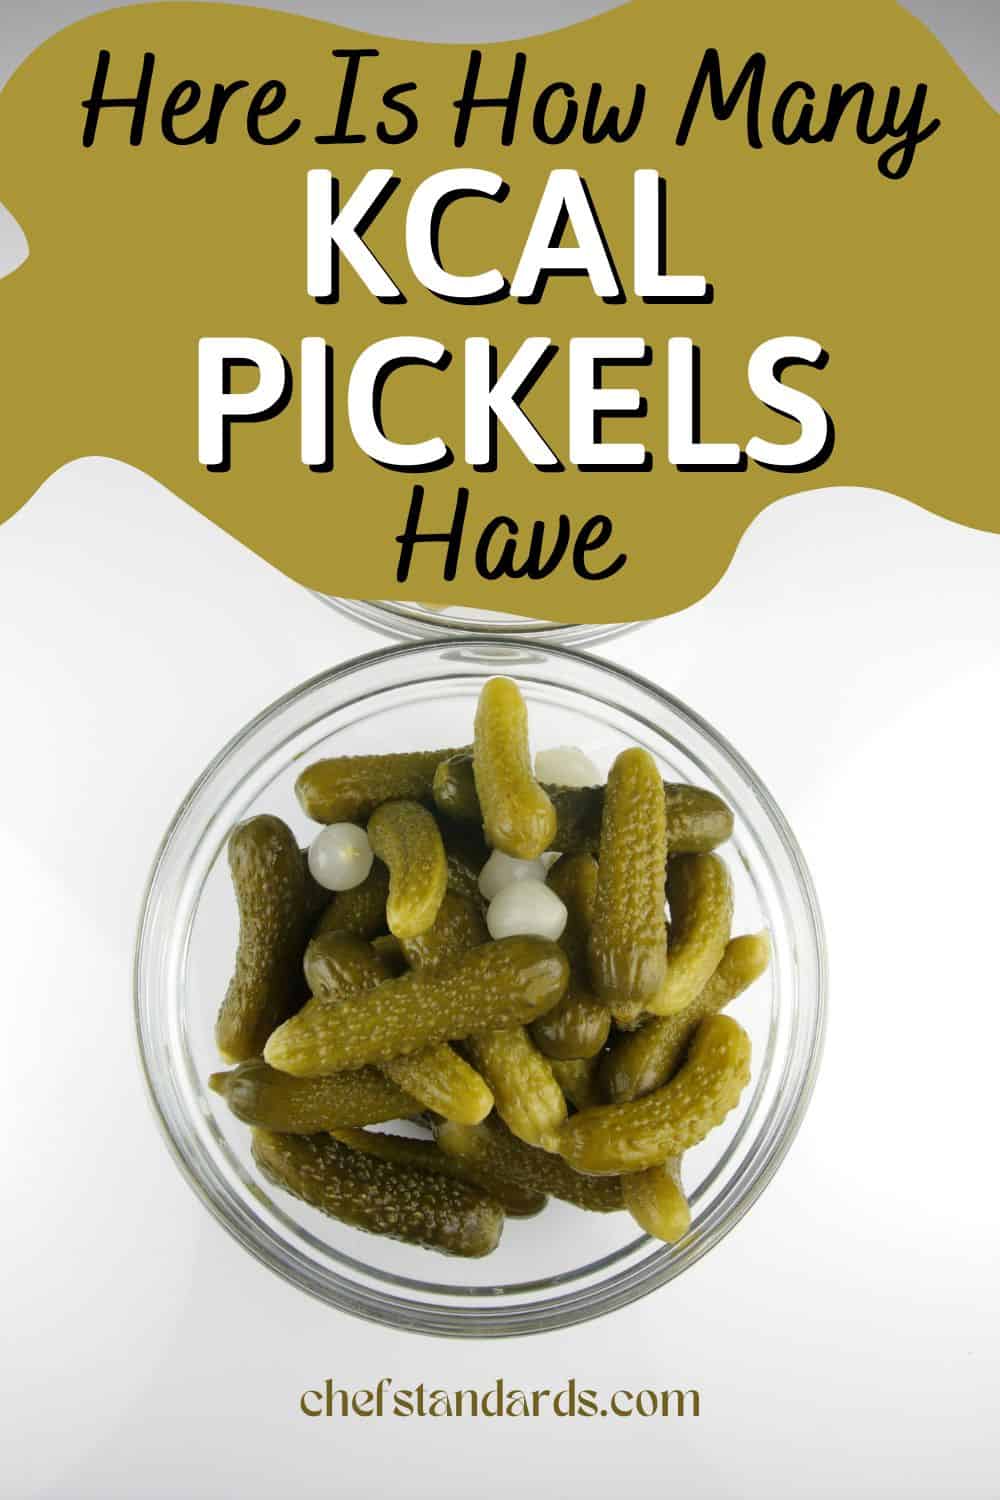 Do Pickles Have Calories And Are They Good For Weight Loss